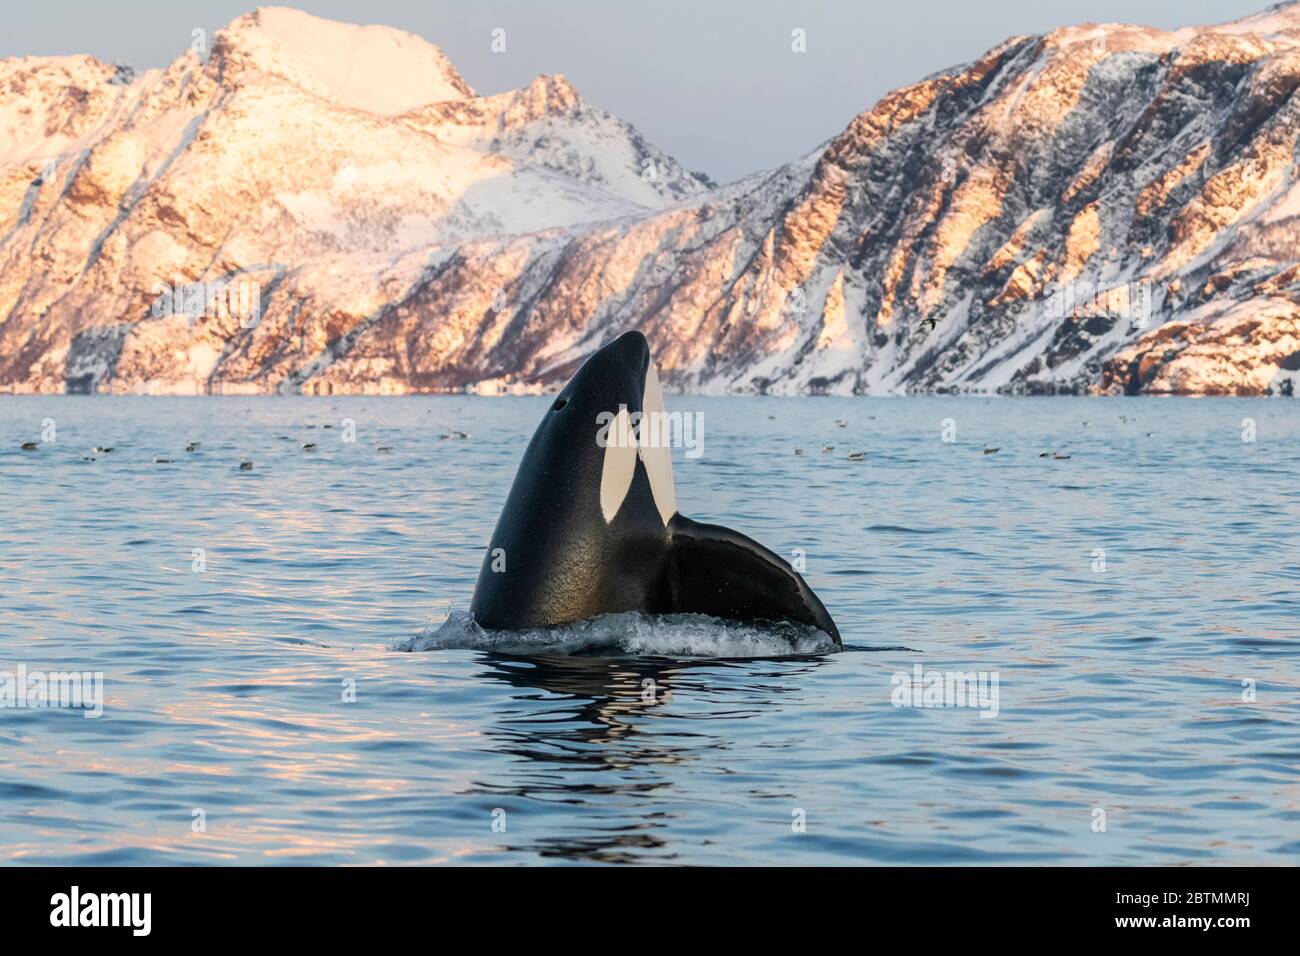 Male killer whale spy hopping in the late afternoon, Kvaenangen Fjord, Norway. Stock Photo